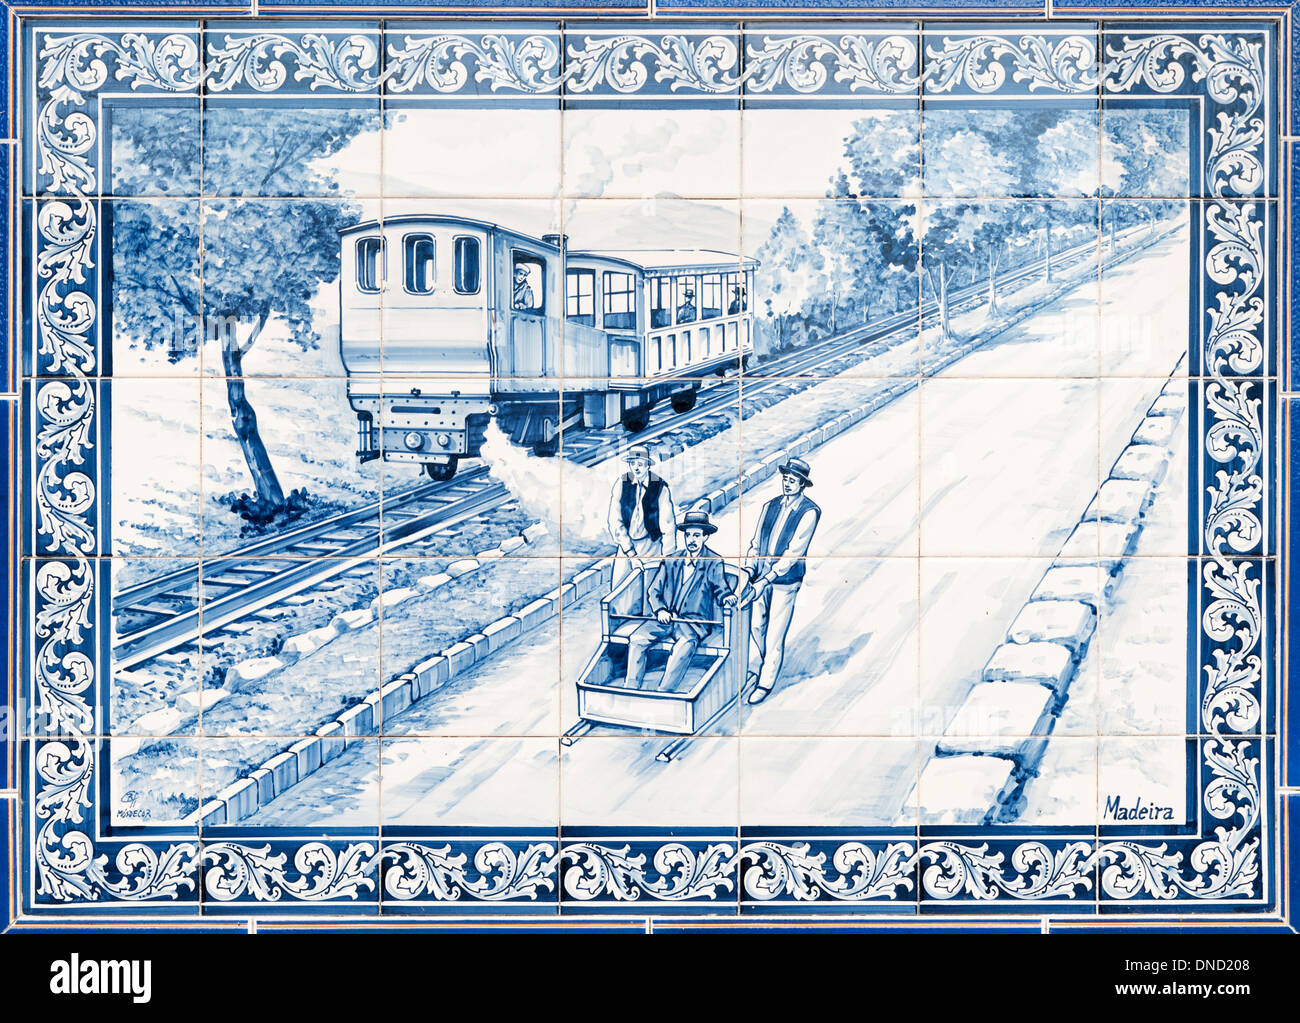 Portugal, Madeira, Monte. Ceramic tile image of the two men pushing a wicker sled on the Monte toboggan run with a train behind Stock Photo